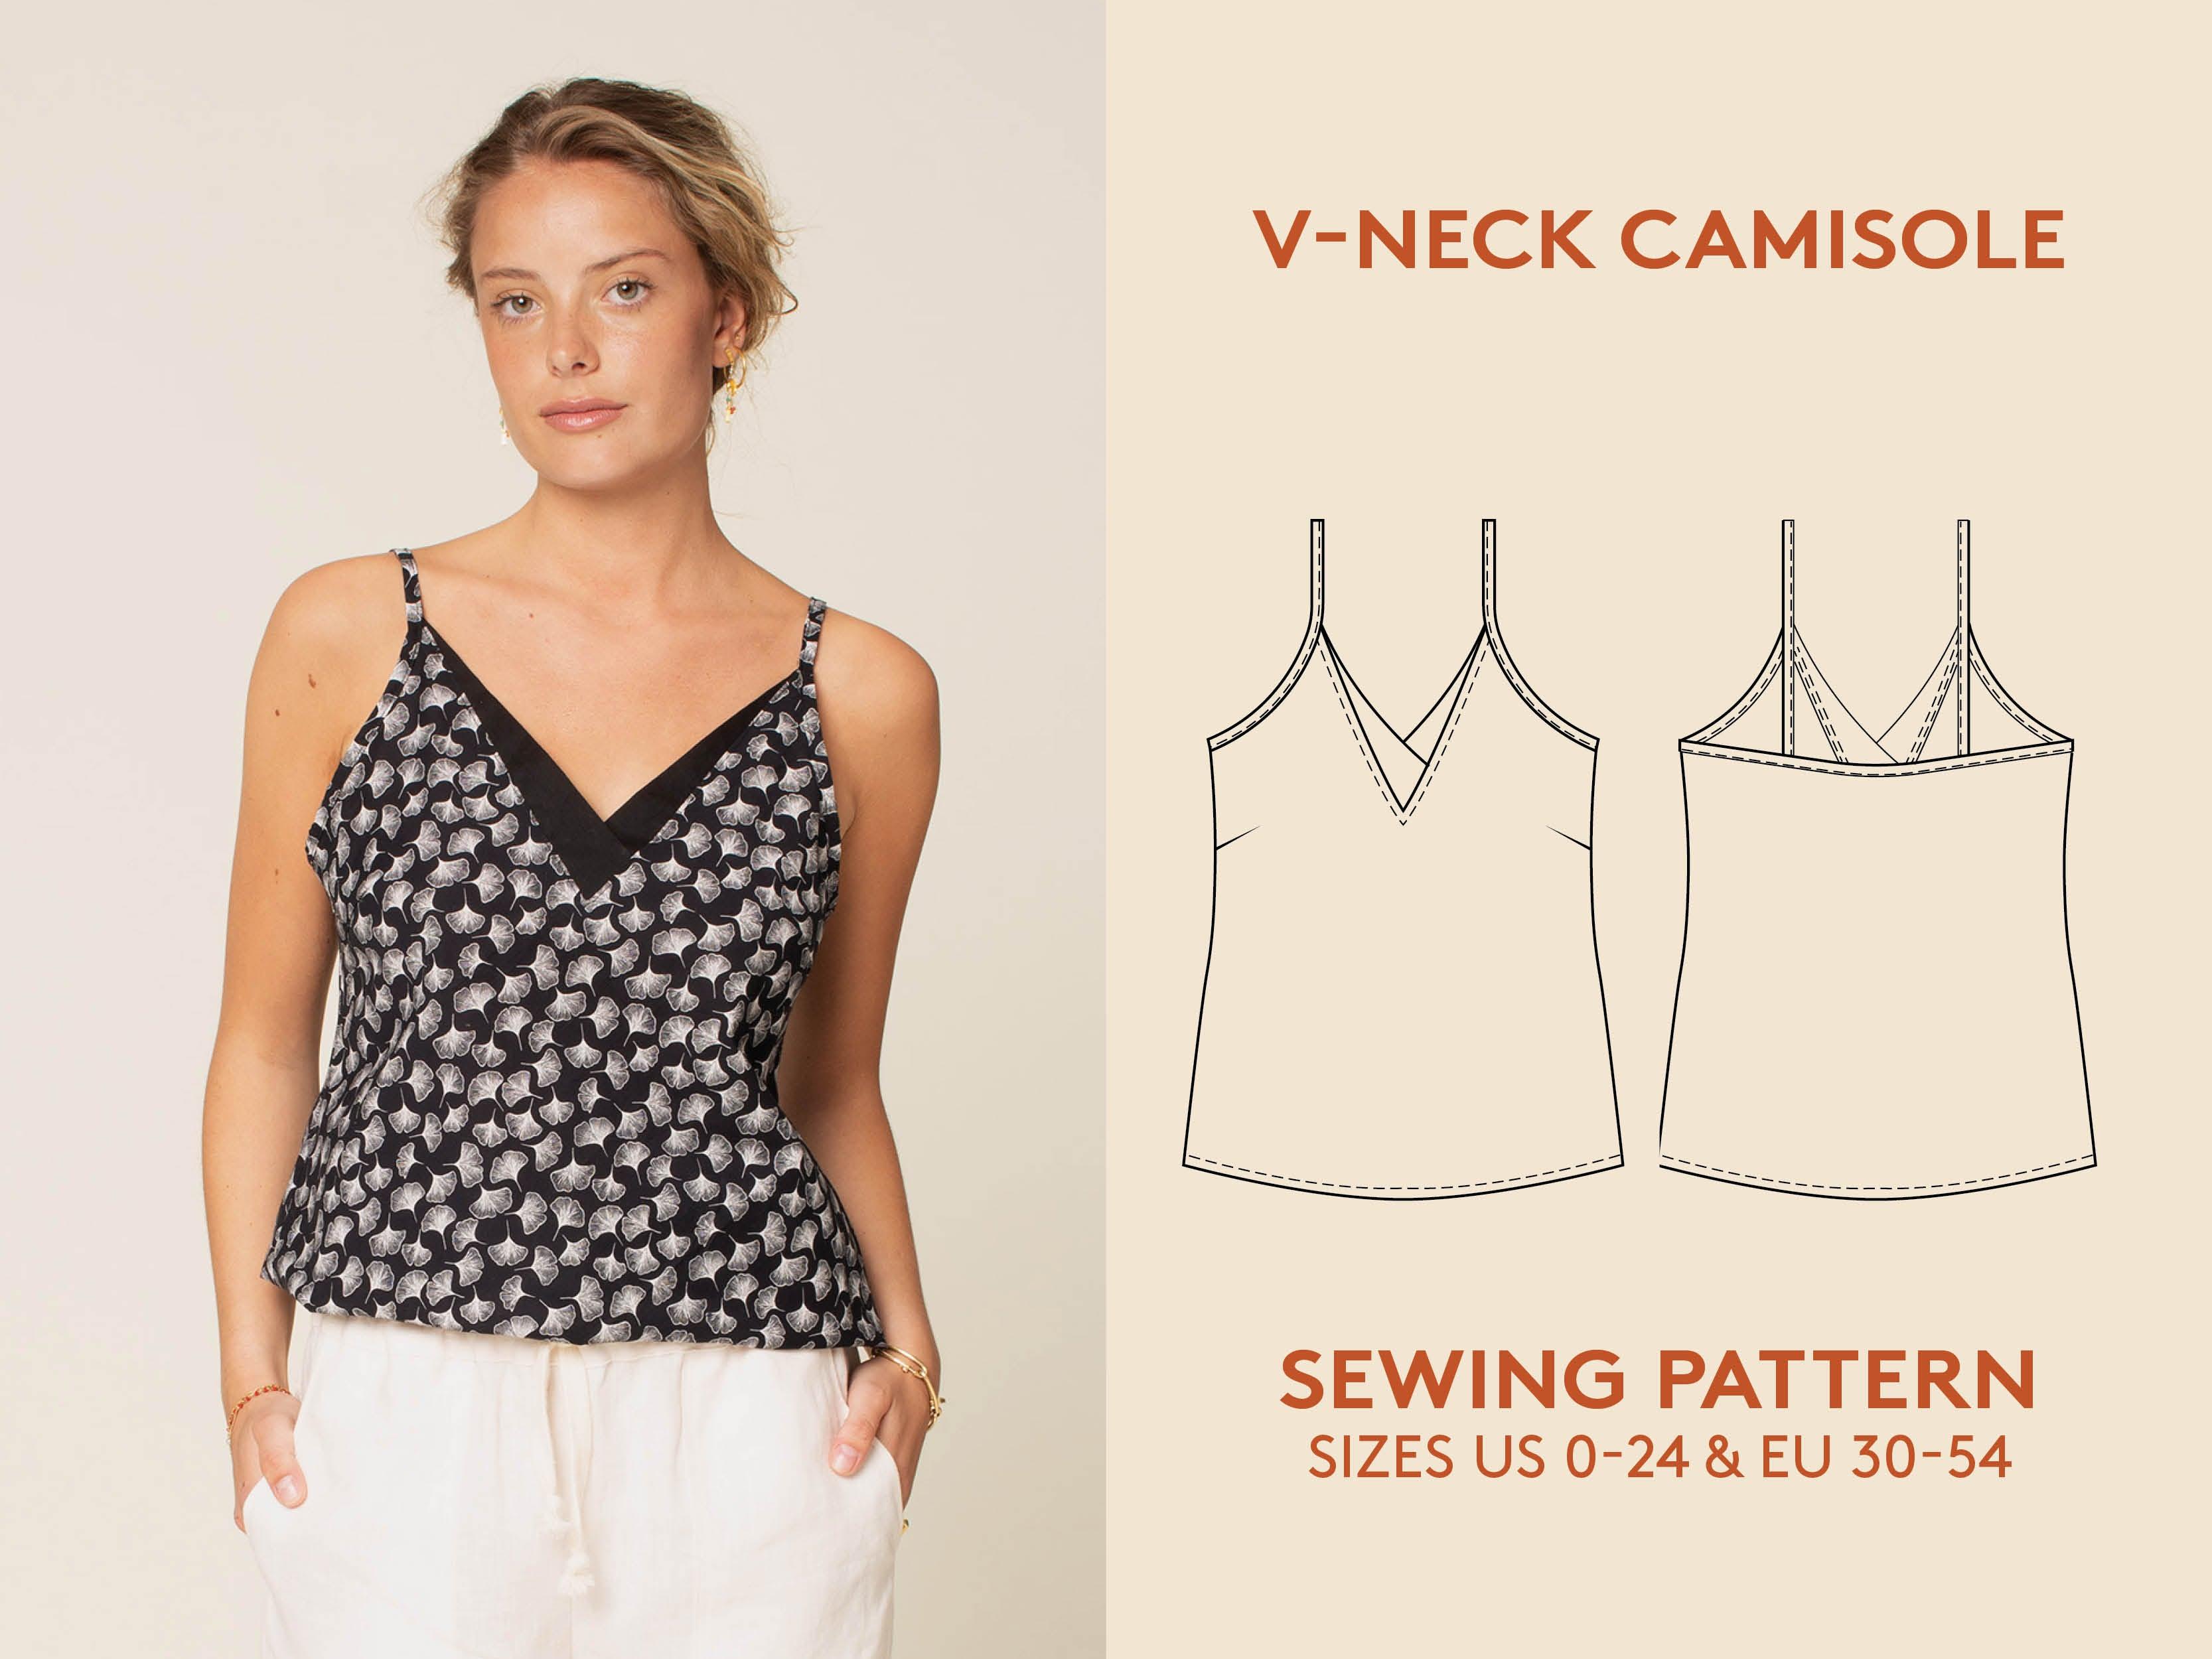 V-neck Camisole sewing pattern